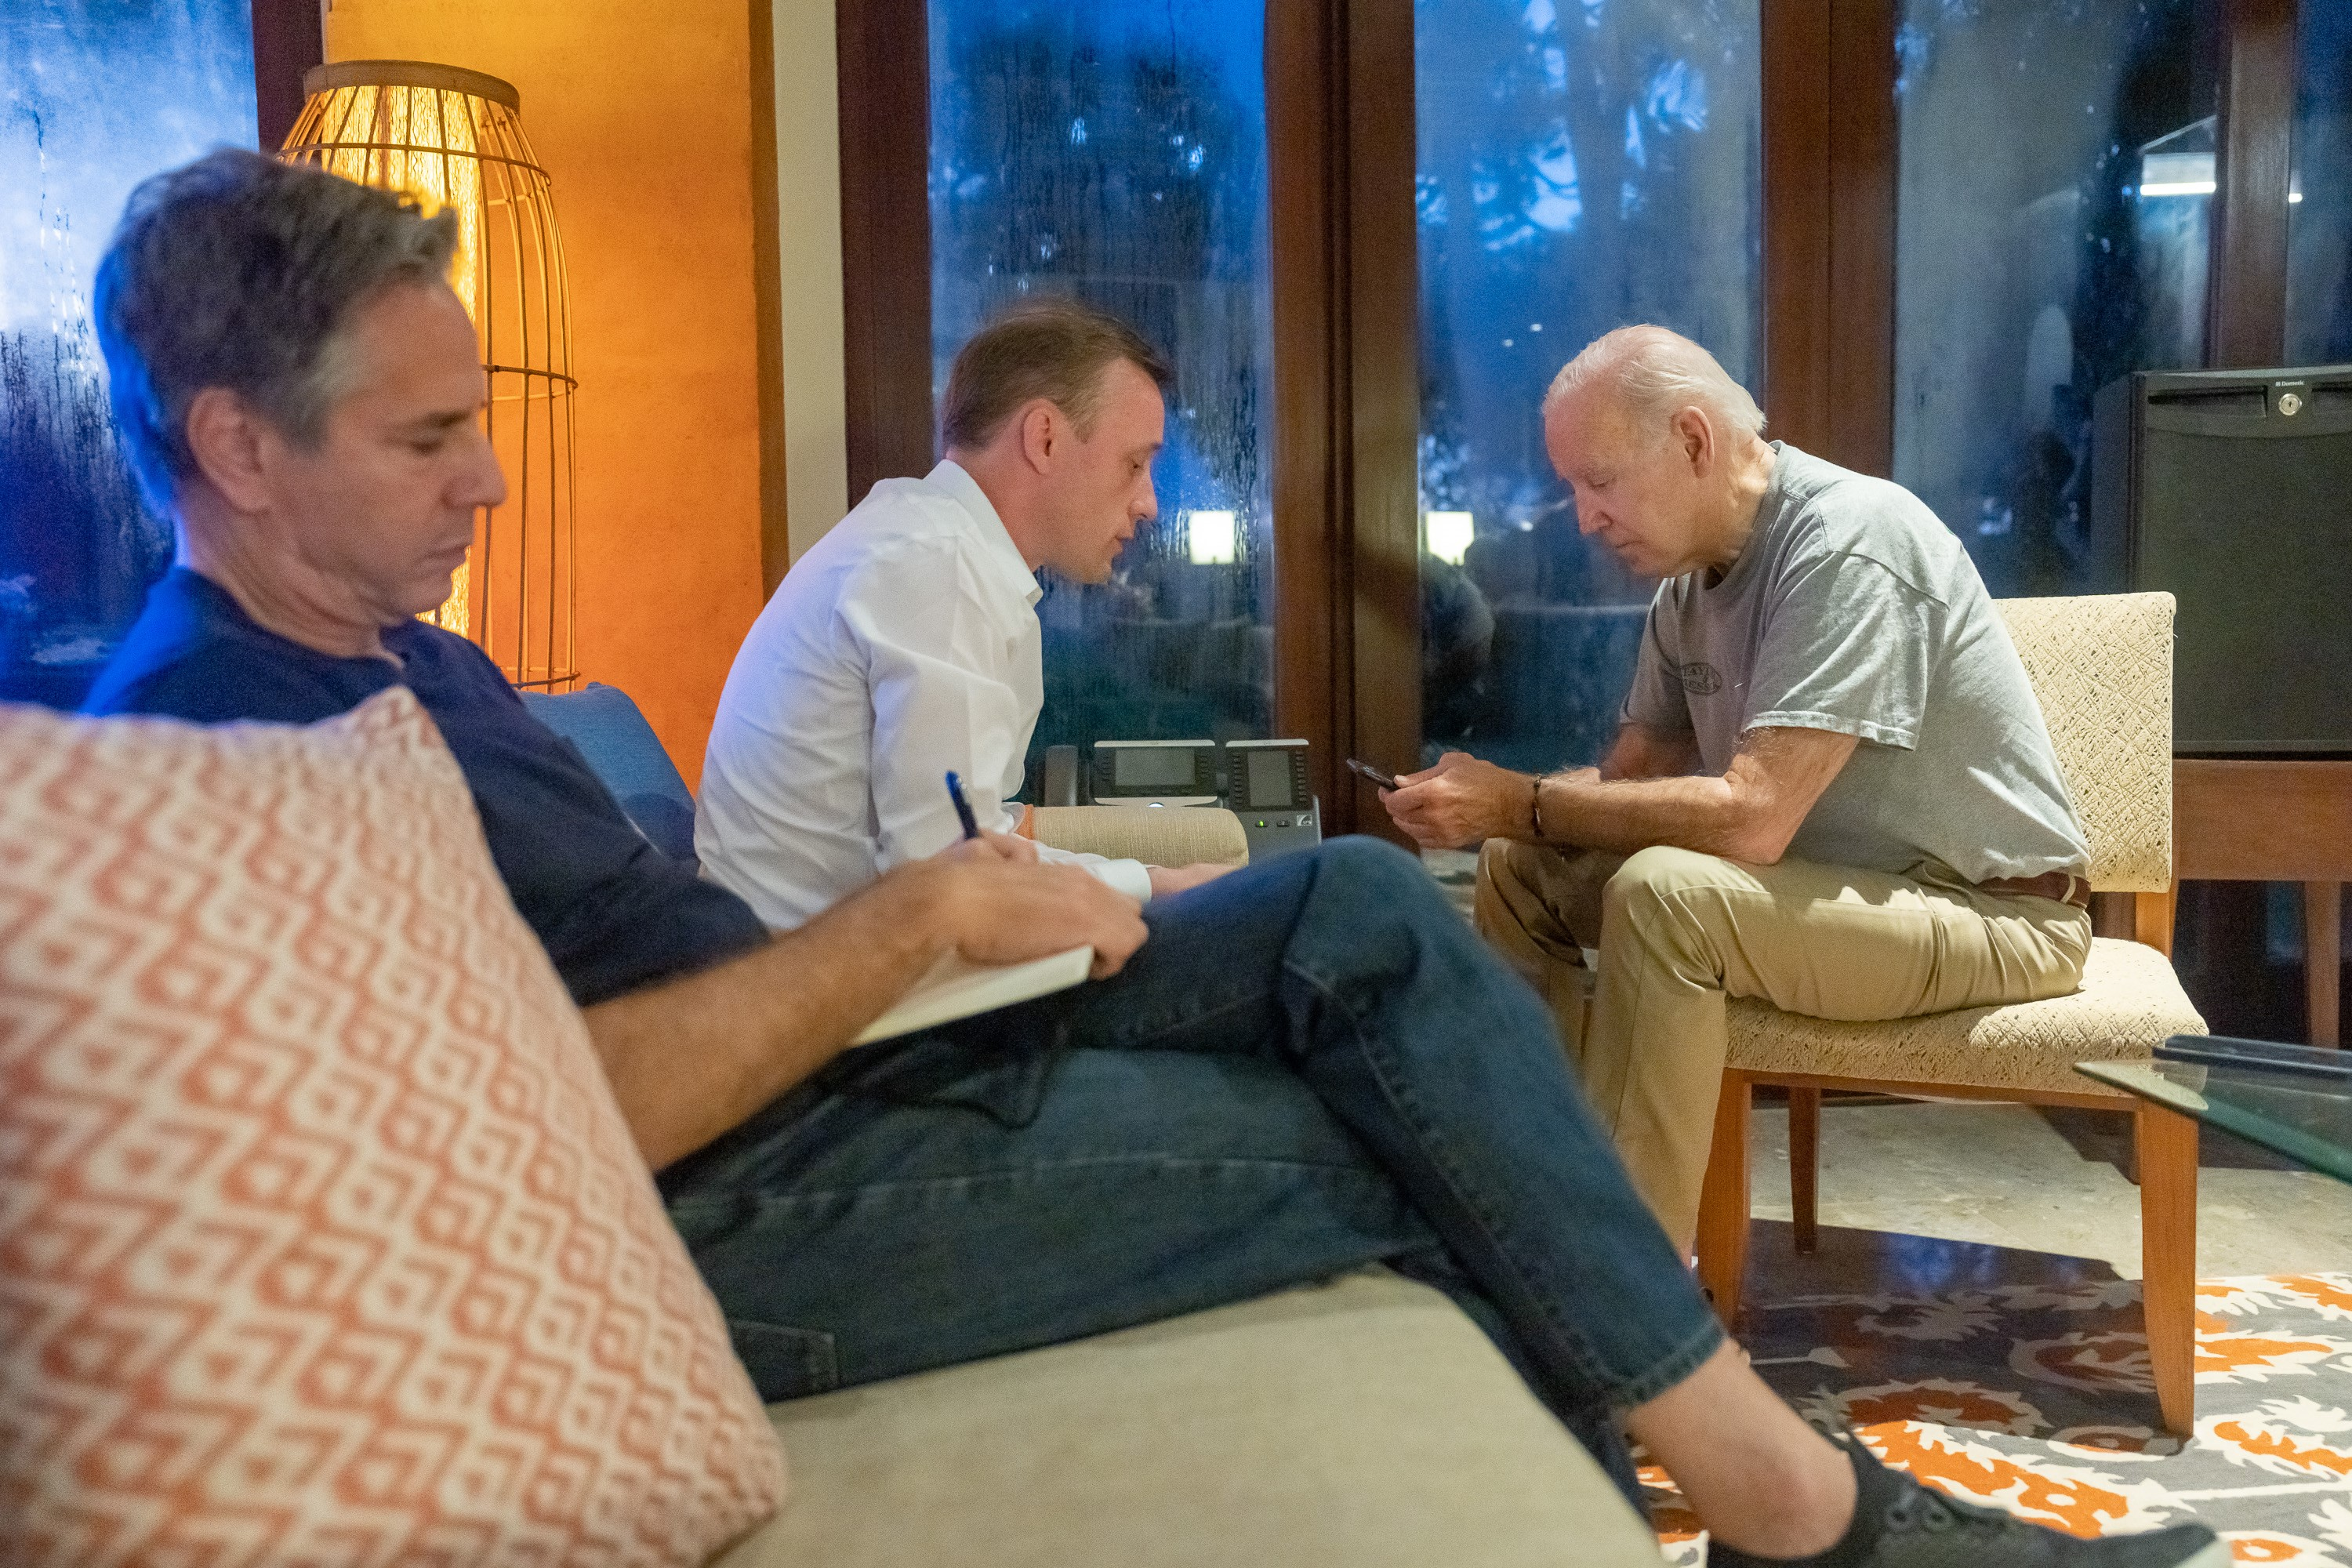 US President Joe Biden, right, spoke with Polish President Andrzej Duda on the phone from his hotel in Bali. He was joined by Secretary of State Blinken, left, and National Security Adviser Jake Sullivan, center.